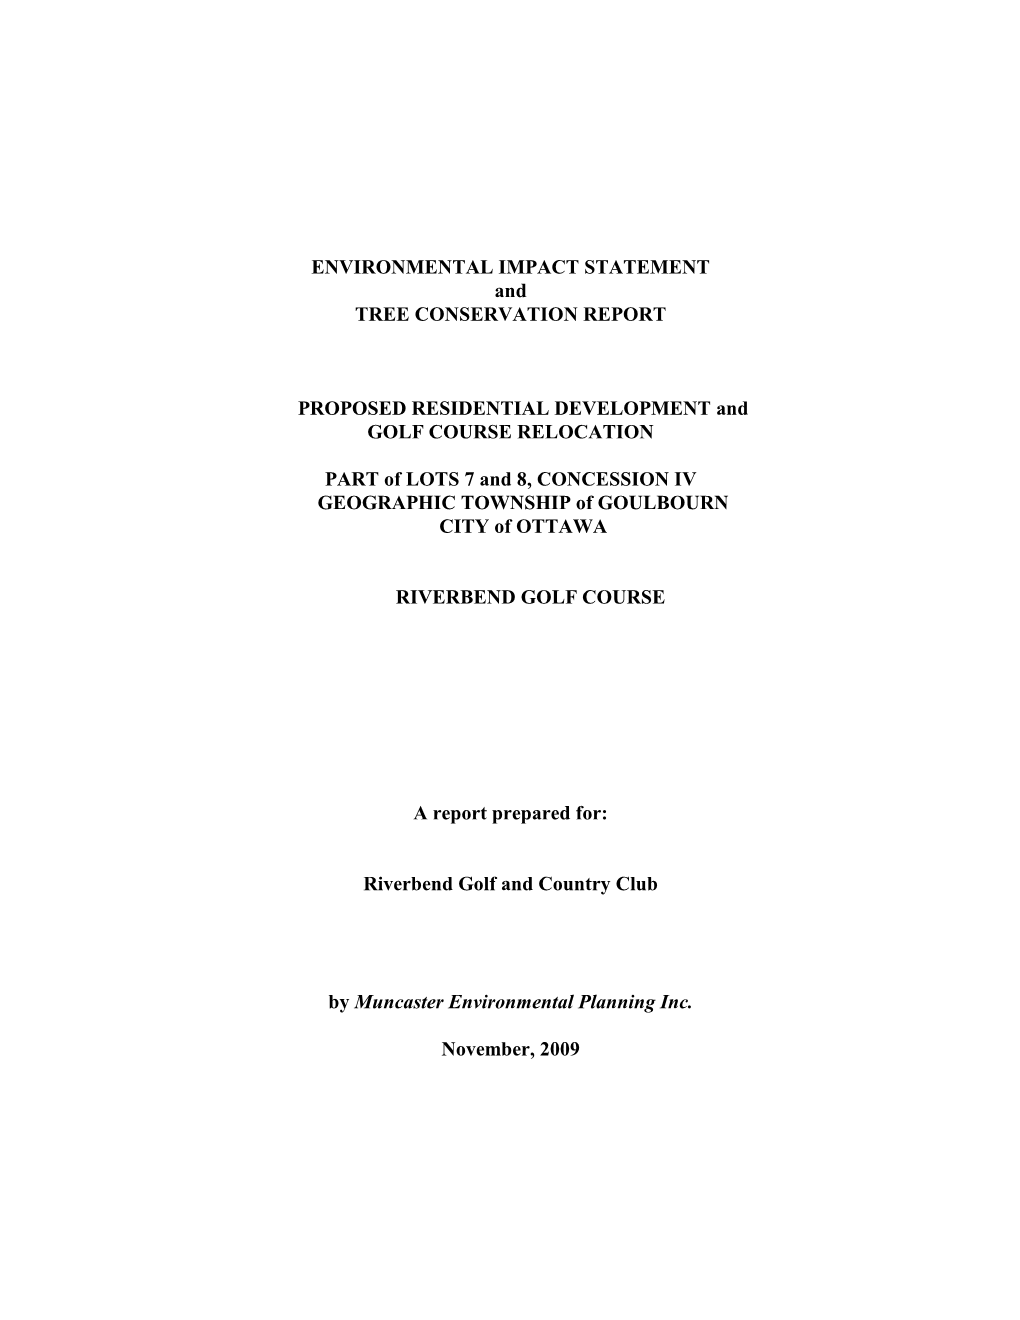 ENVIRONMENTAL IMPACT STATEMENT and TREE CONSERVATION REPORT